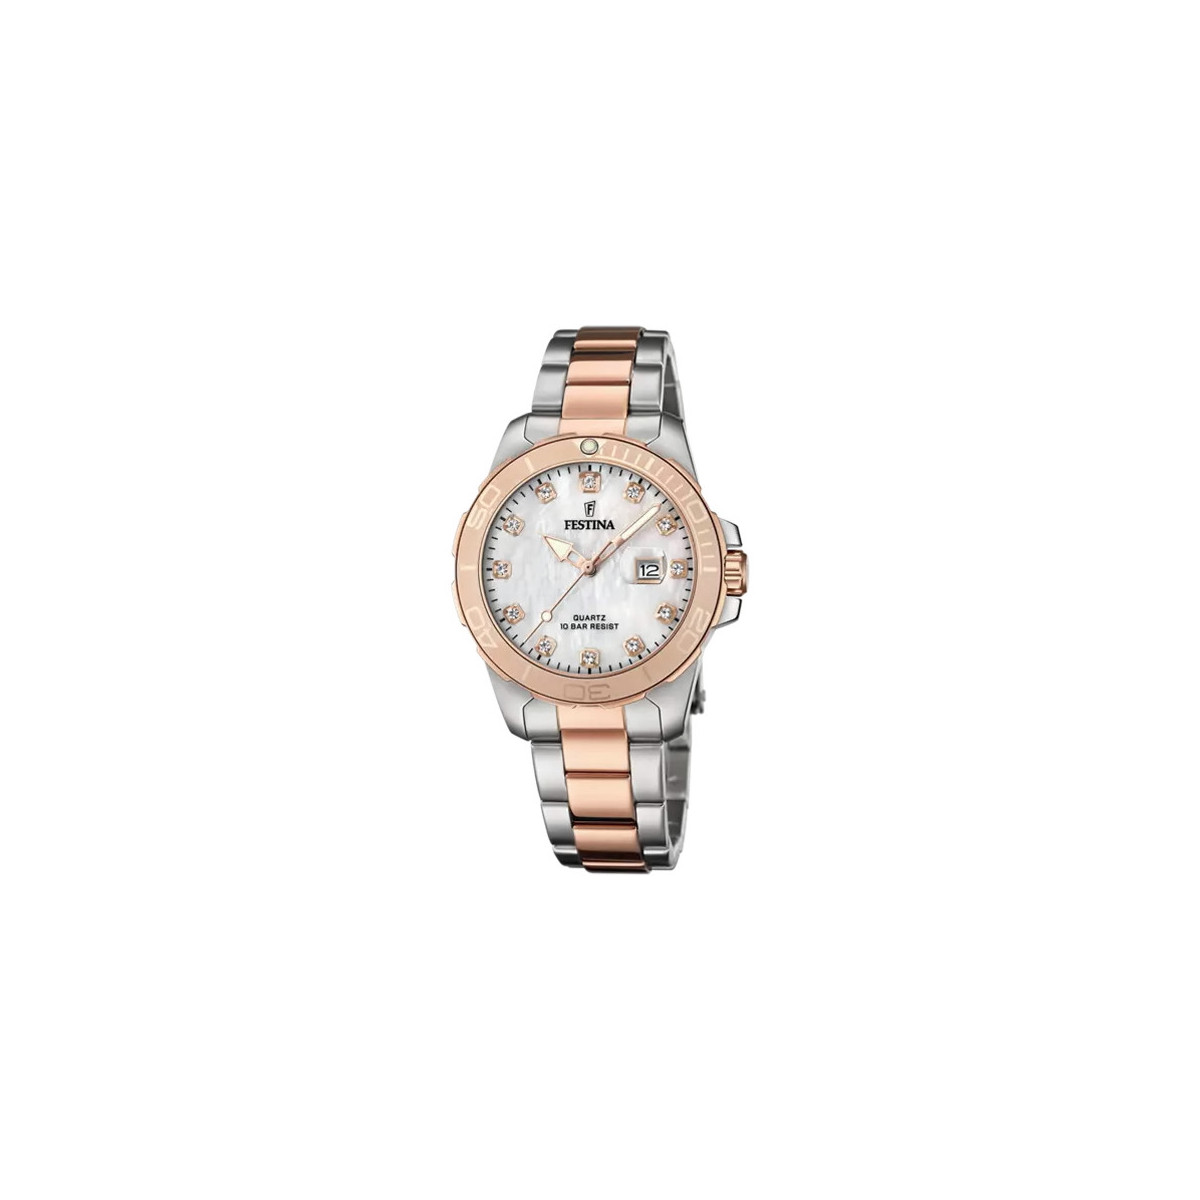 WATCH FESTINA BOYFRIEND COLLECTION, MOTHER OF PEARL STEEL STRAP